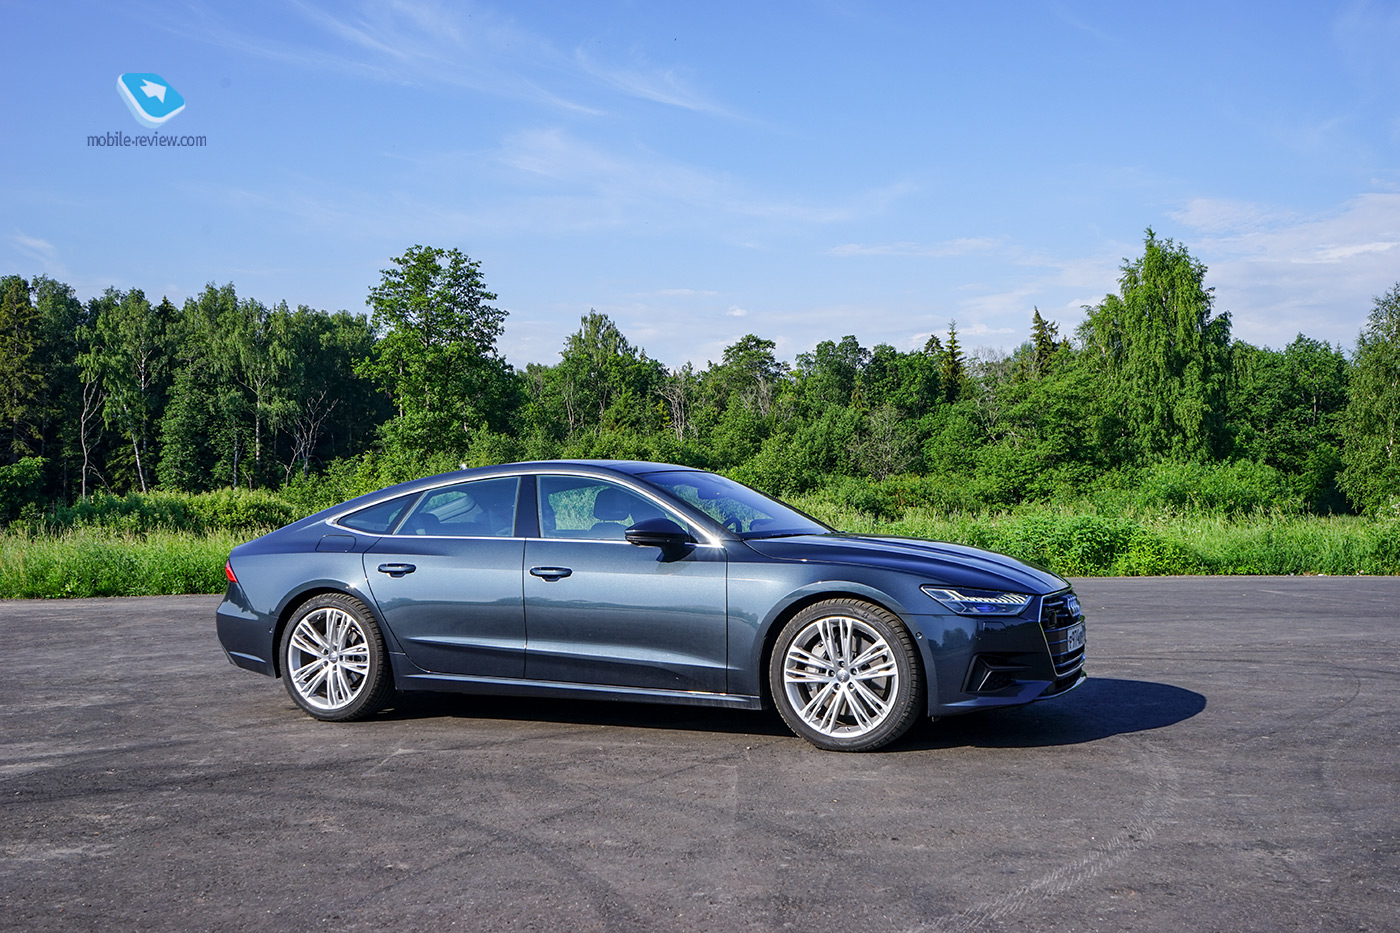 Audi A7 Sportback test. Between sedan and coupe